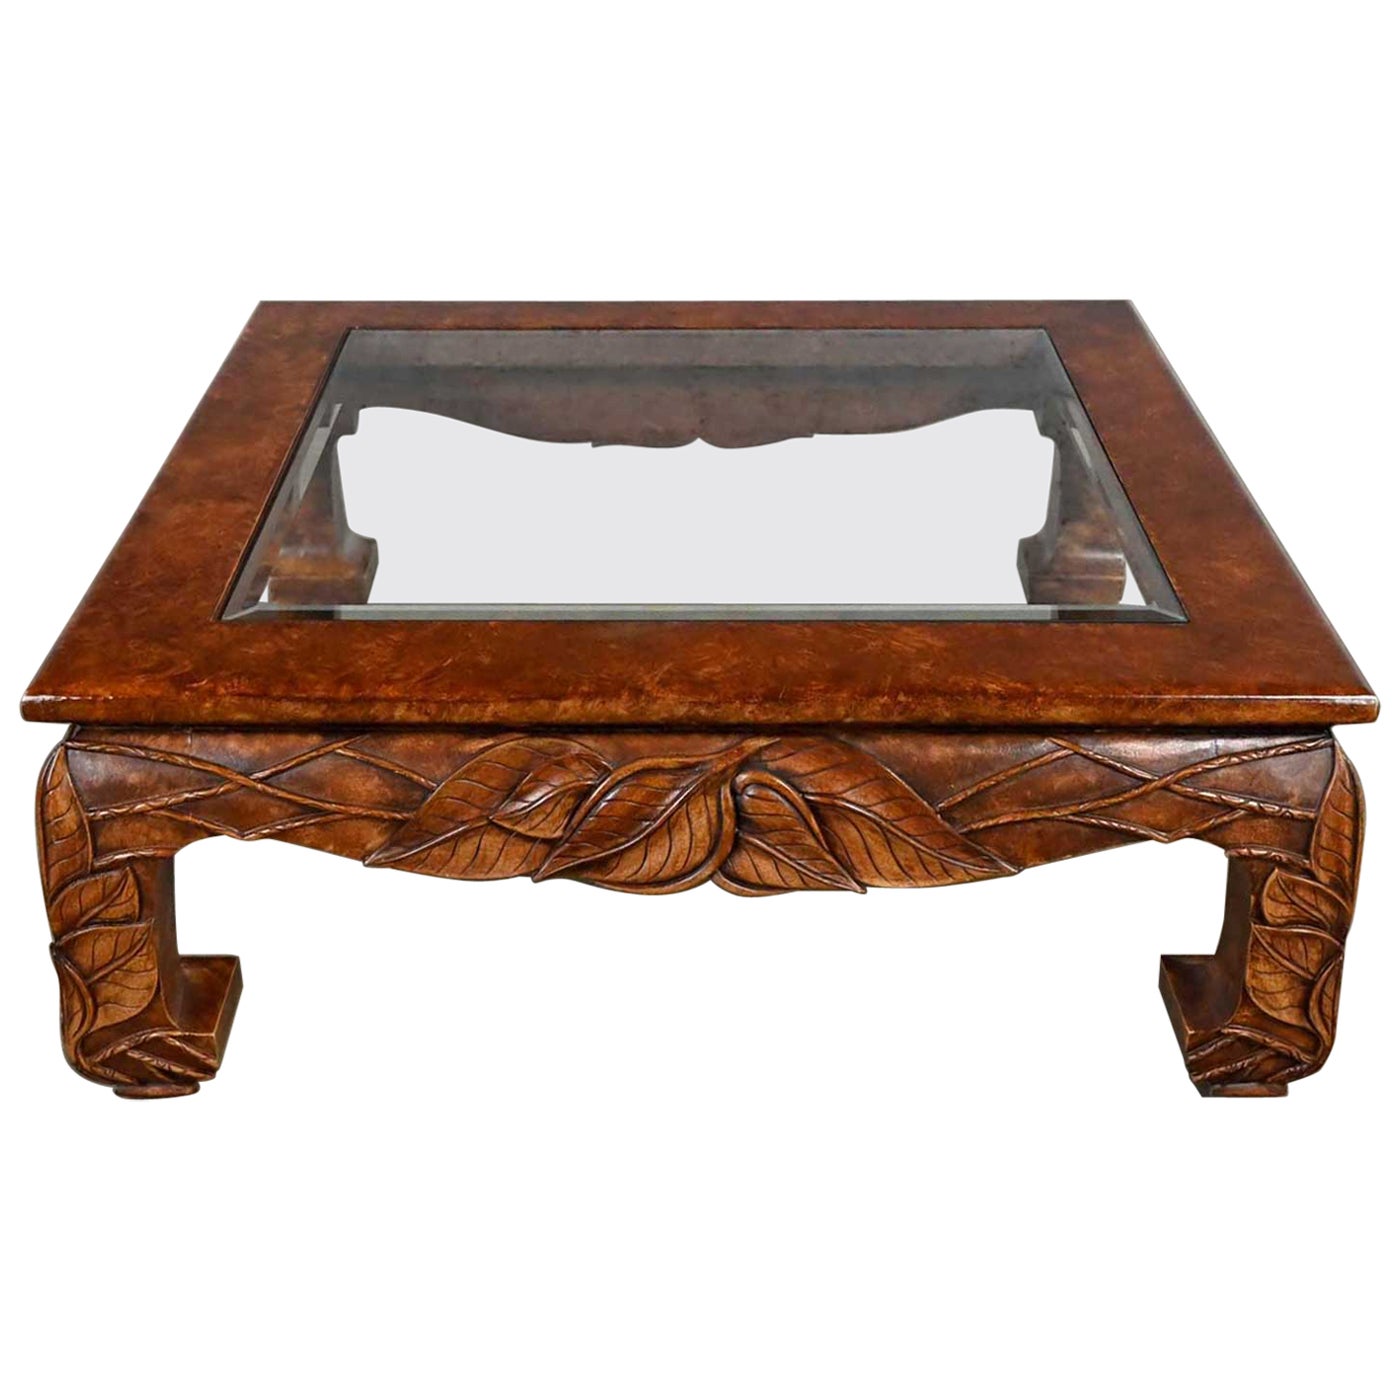 Casa Bique Chinoiserie Chow Leg Carved Square Coffee Table Attr Robert Marcius